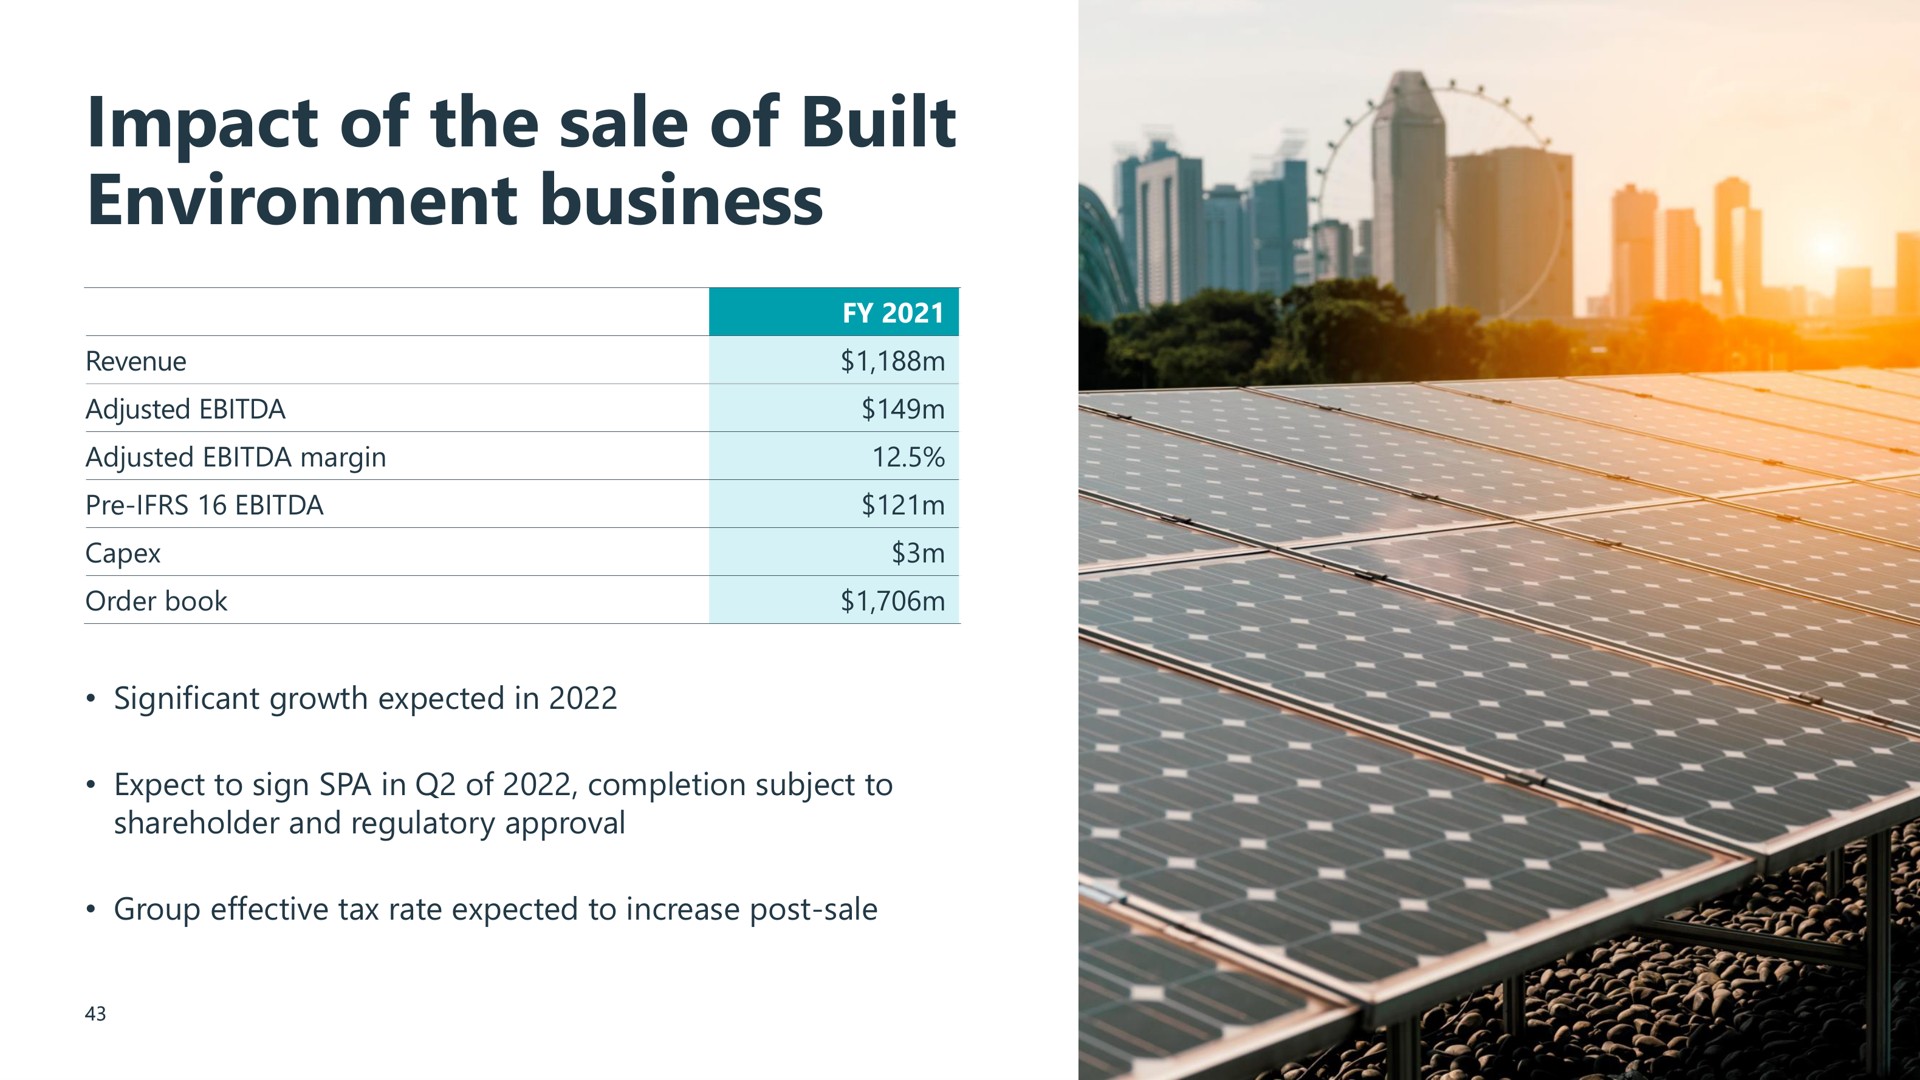 impact of the sale of built environment business | Wood Group